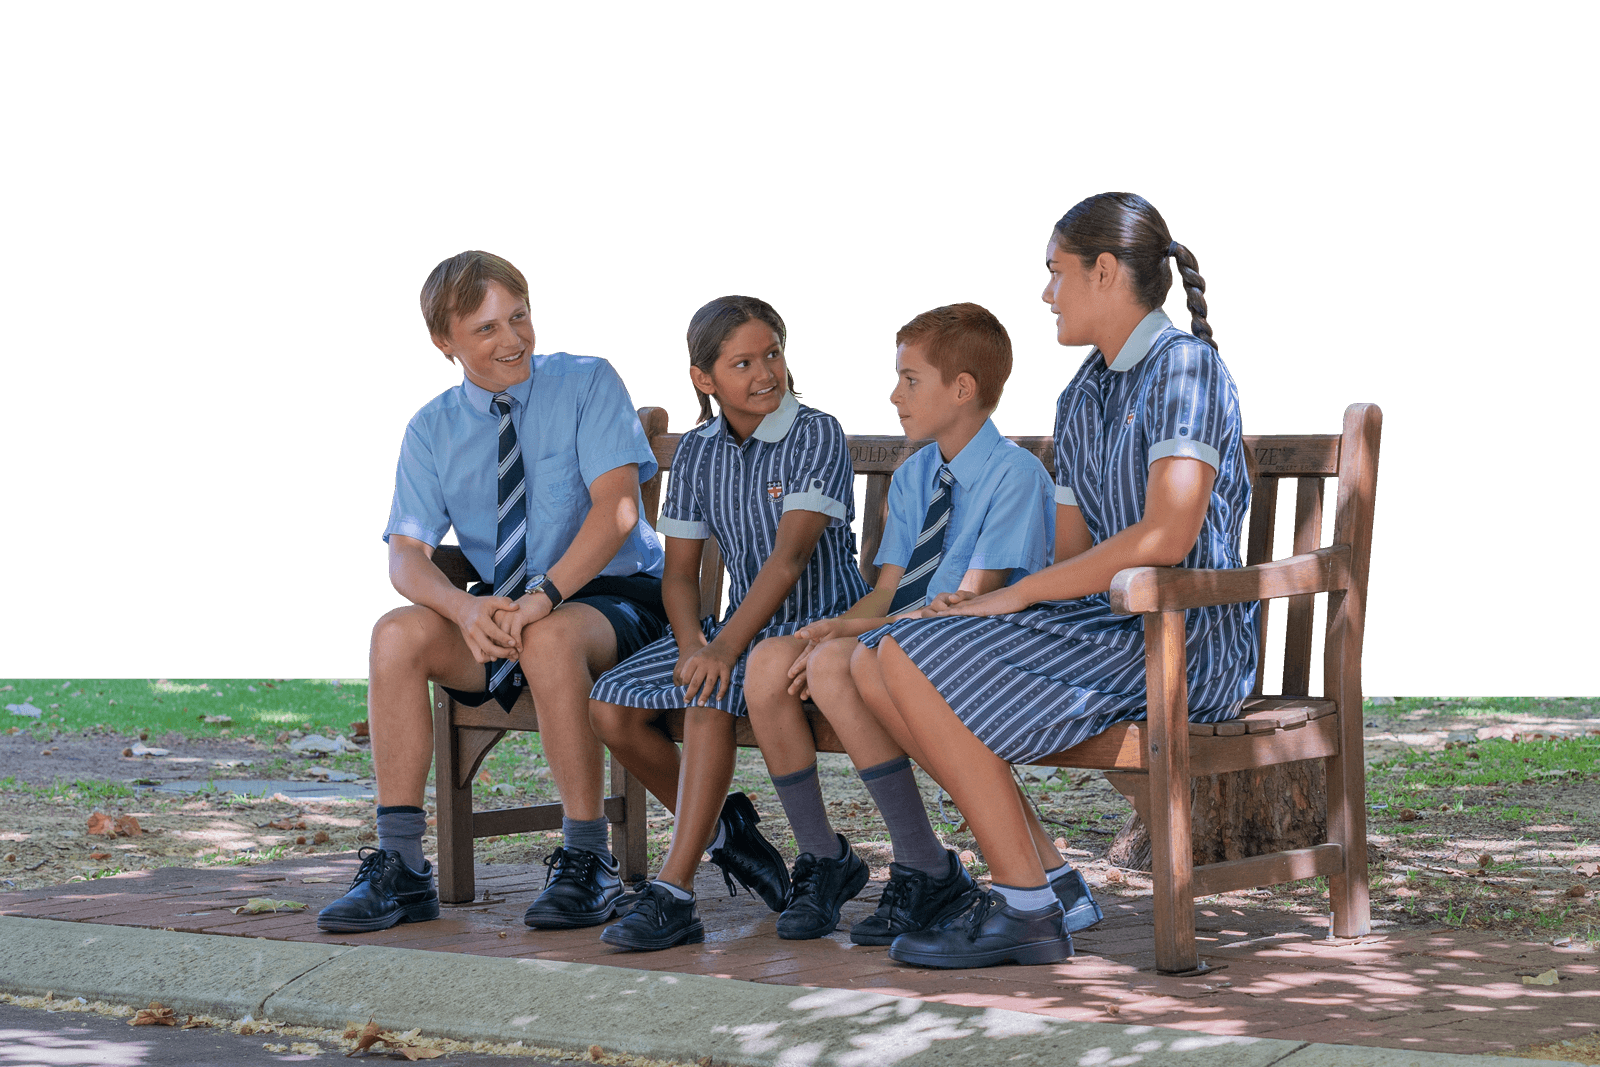 4 Guildford Grammar School students sitting next to each other on a School bench.